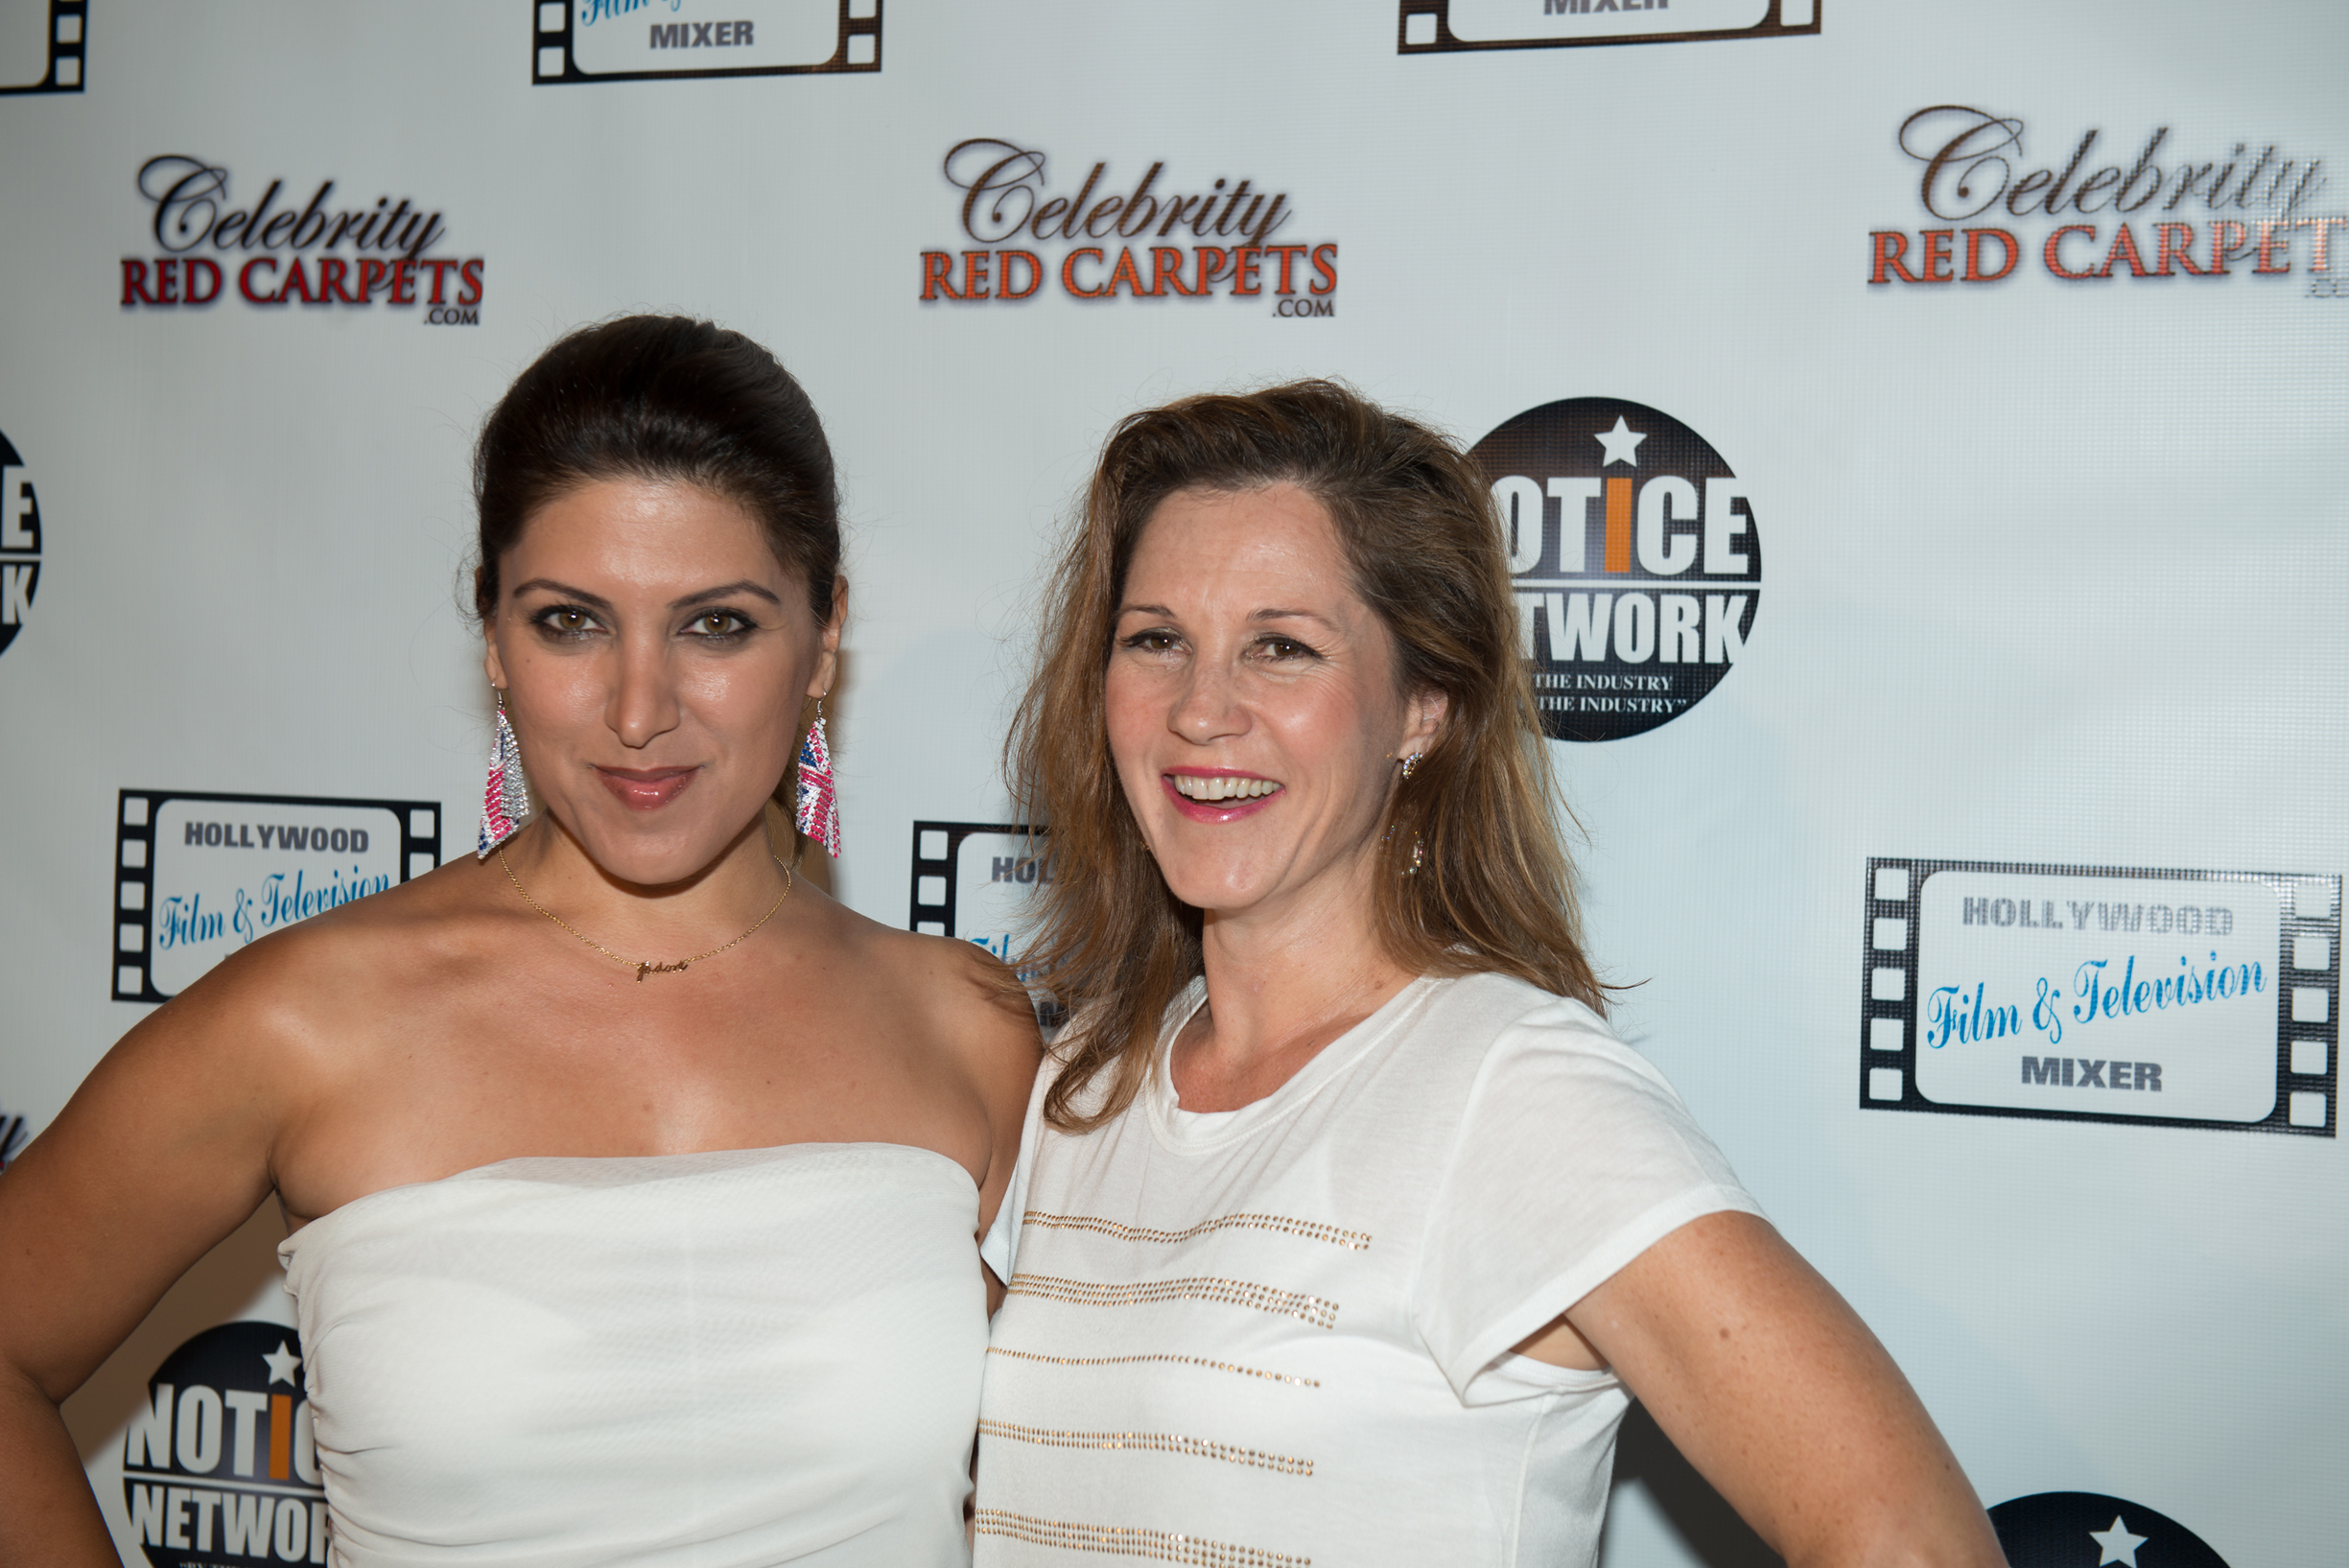 Michelle Alexandria (Producer) and Sonia Curtis @ The W Hotel White Carpet Event